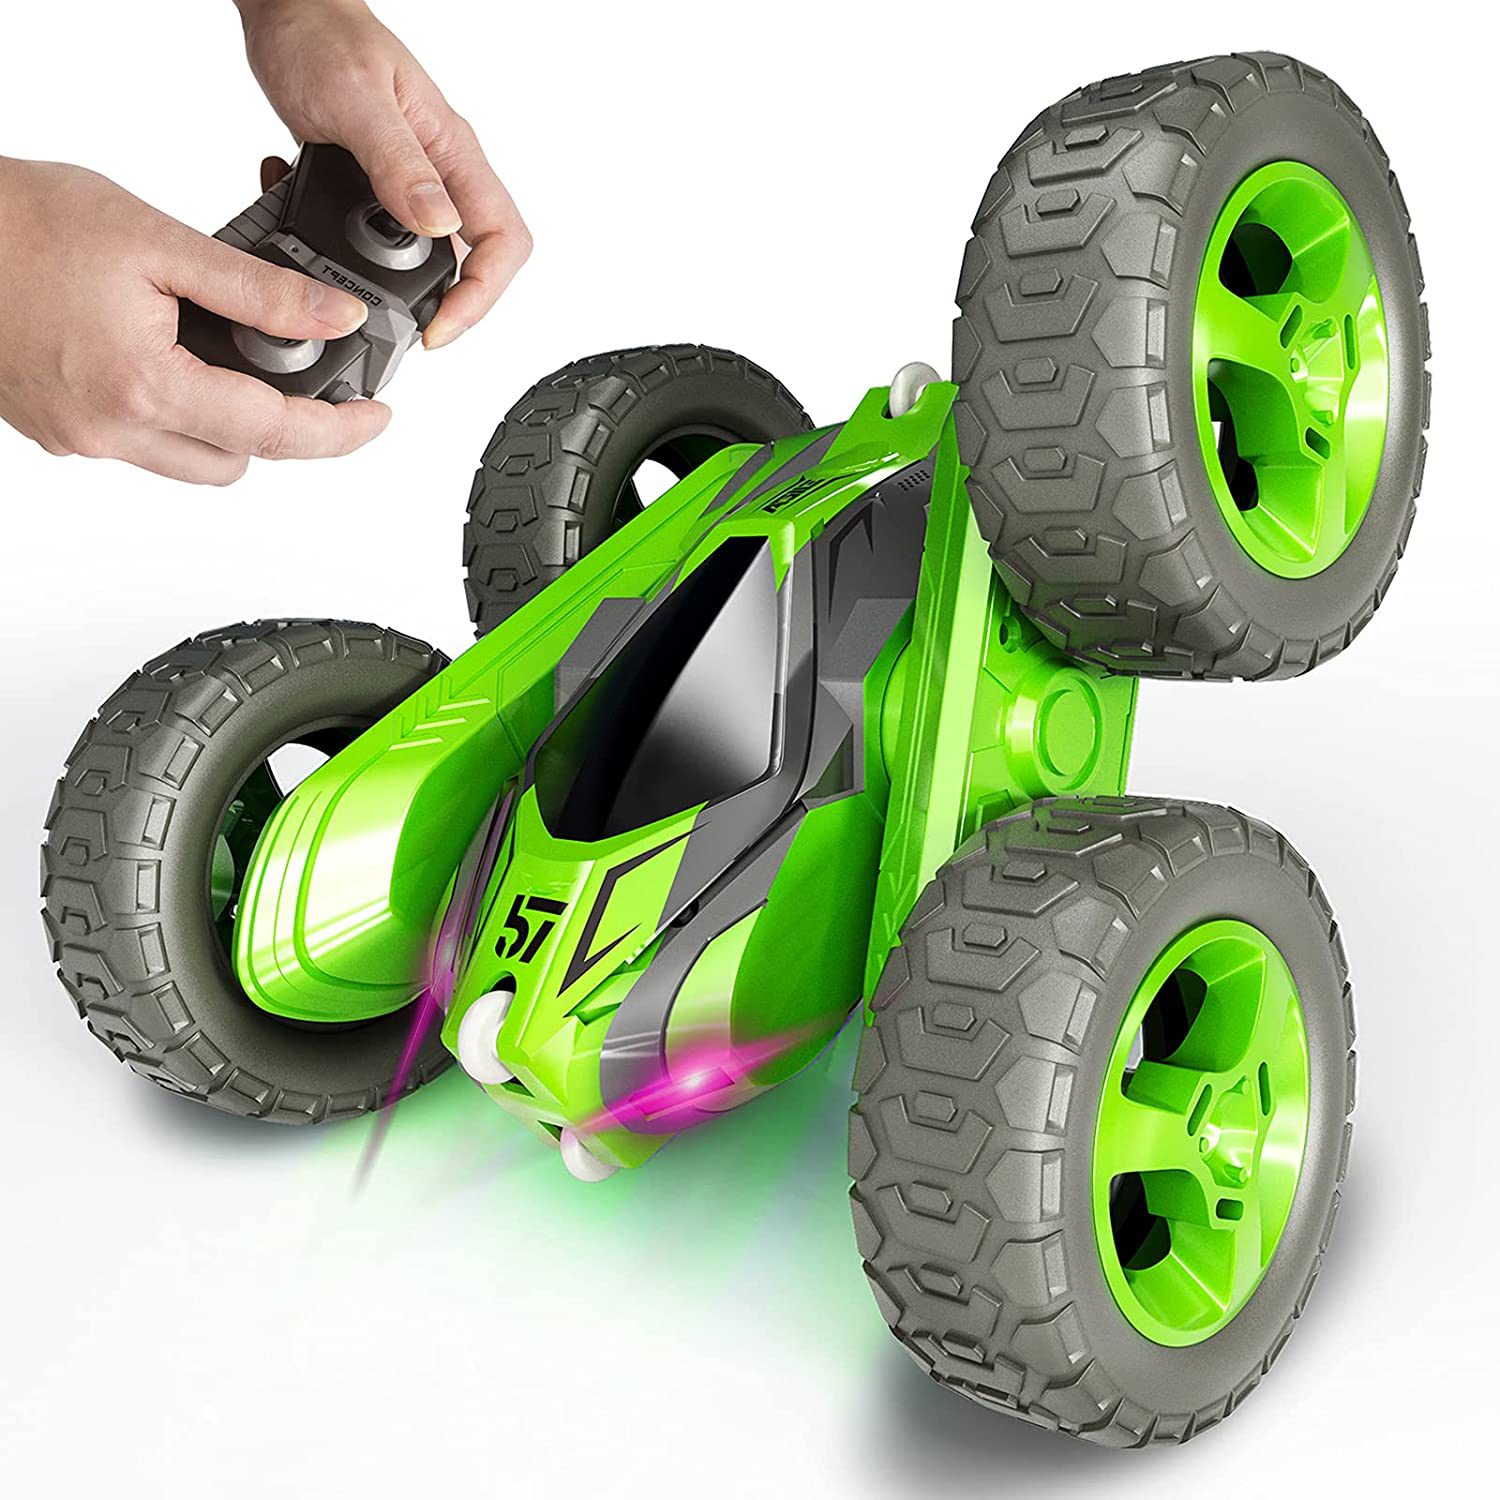 Tecnock Remote Control Car for Kids,360 ° Rotating Double Sided Flip RC Stunt Car,2.4Ghz 4WD Toy Car with Rechargeable Battery for 45 Min Play,Great Gifts for Boys and Girls(Green)